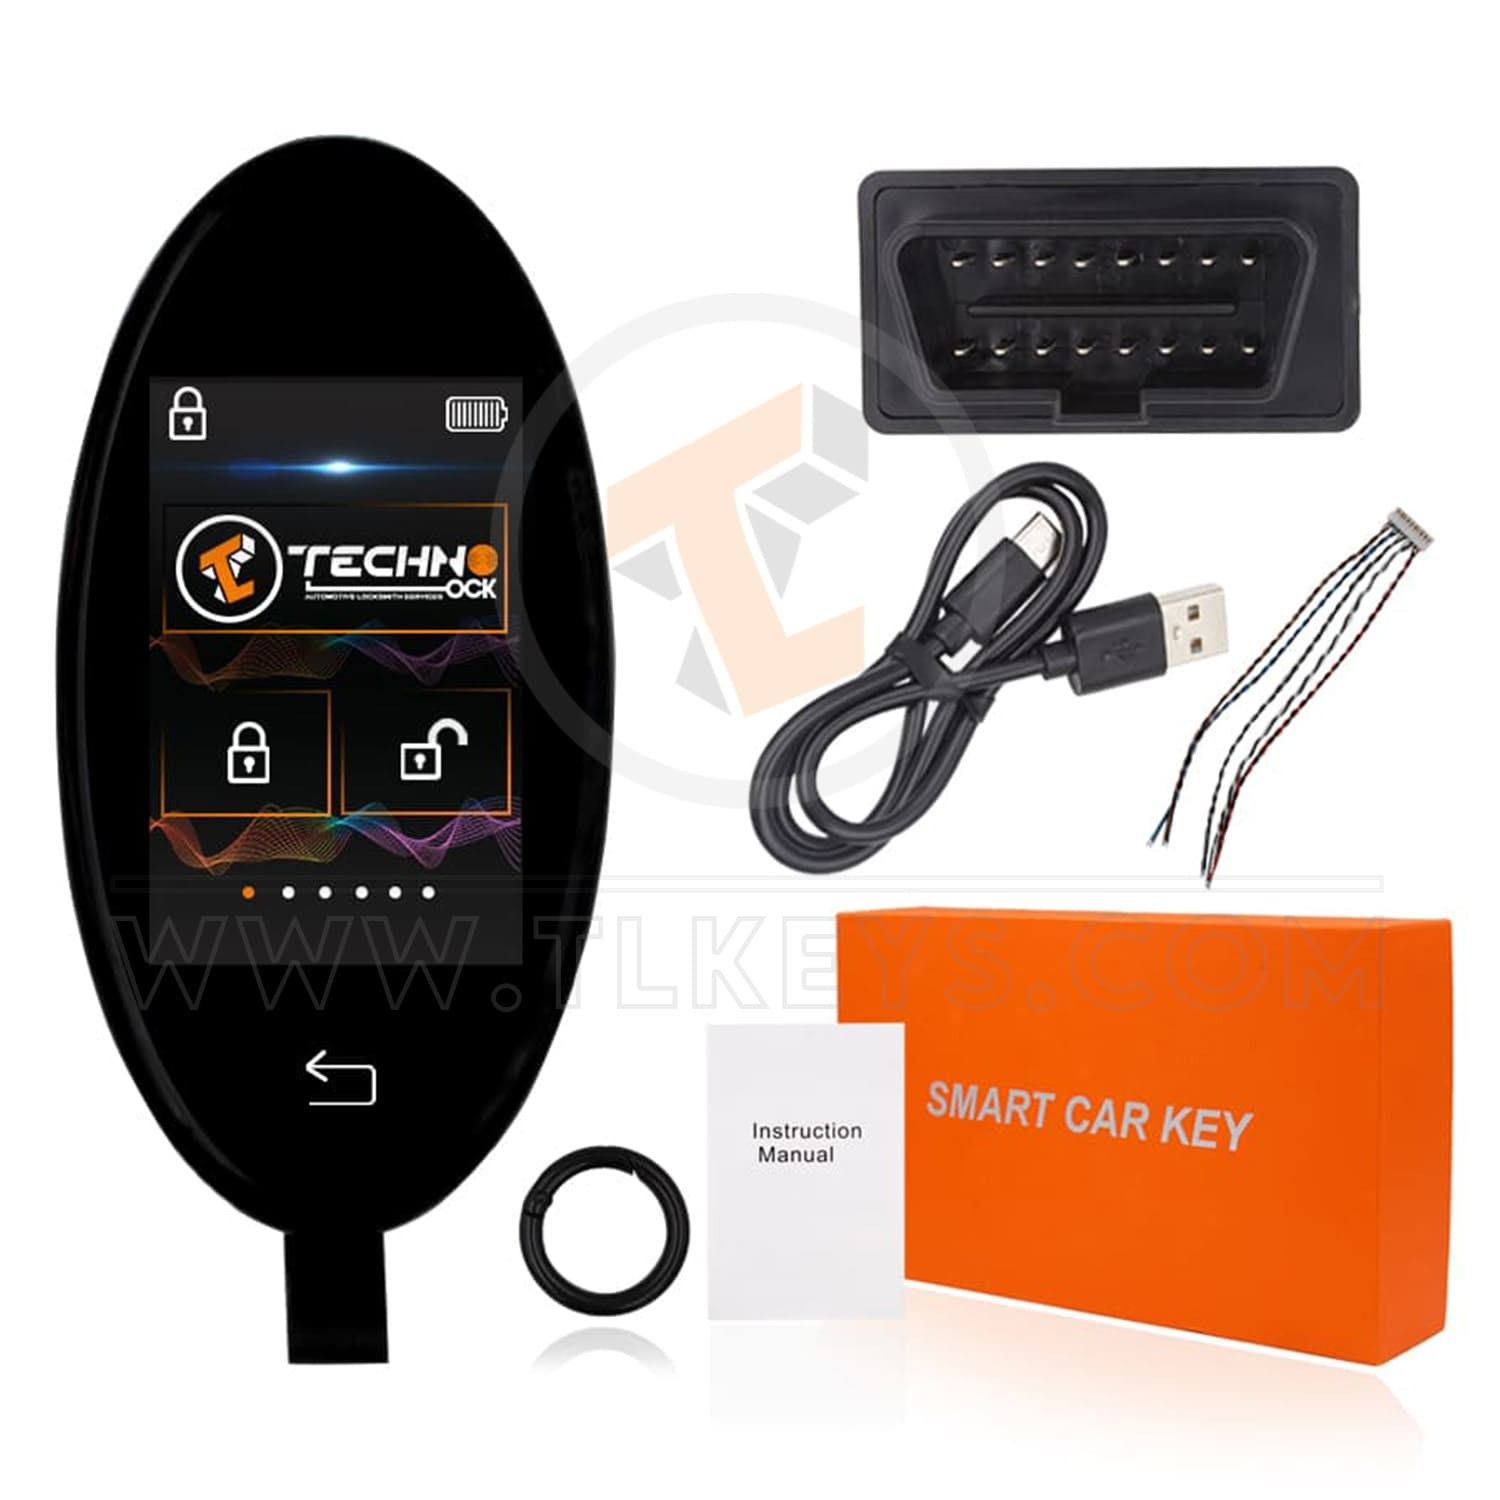 LCD Universal Modified Smart Key Remote Kit For All Keyless Entry Car Nissan Type Keyless Go Yes